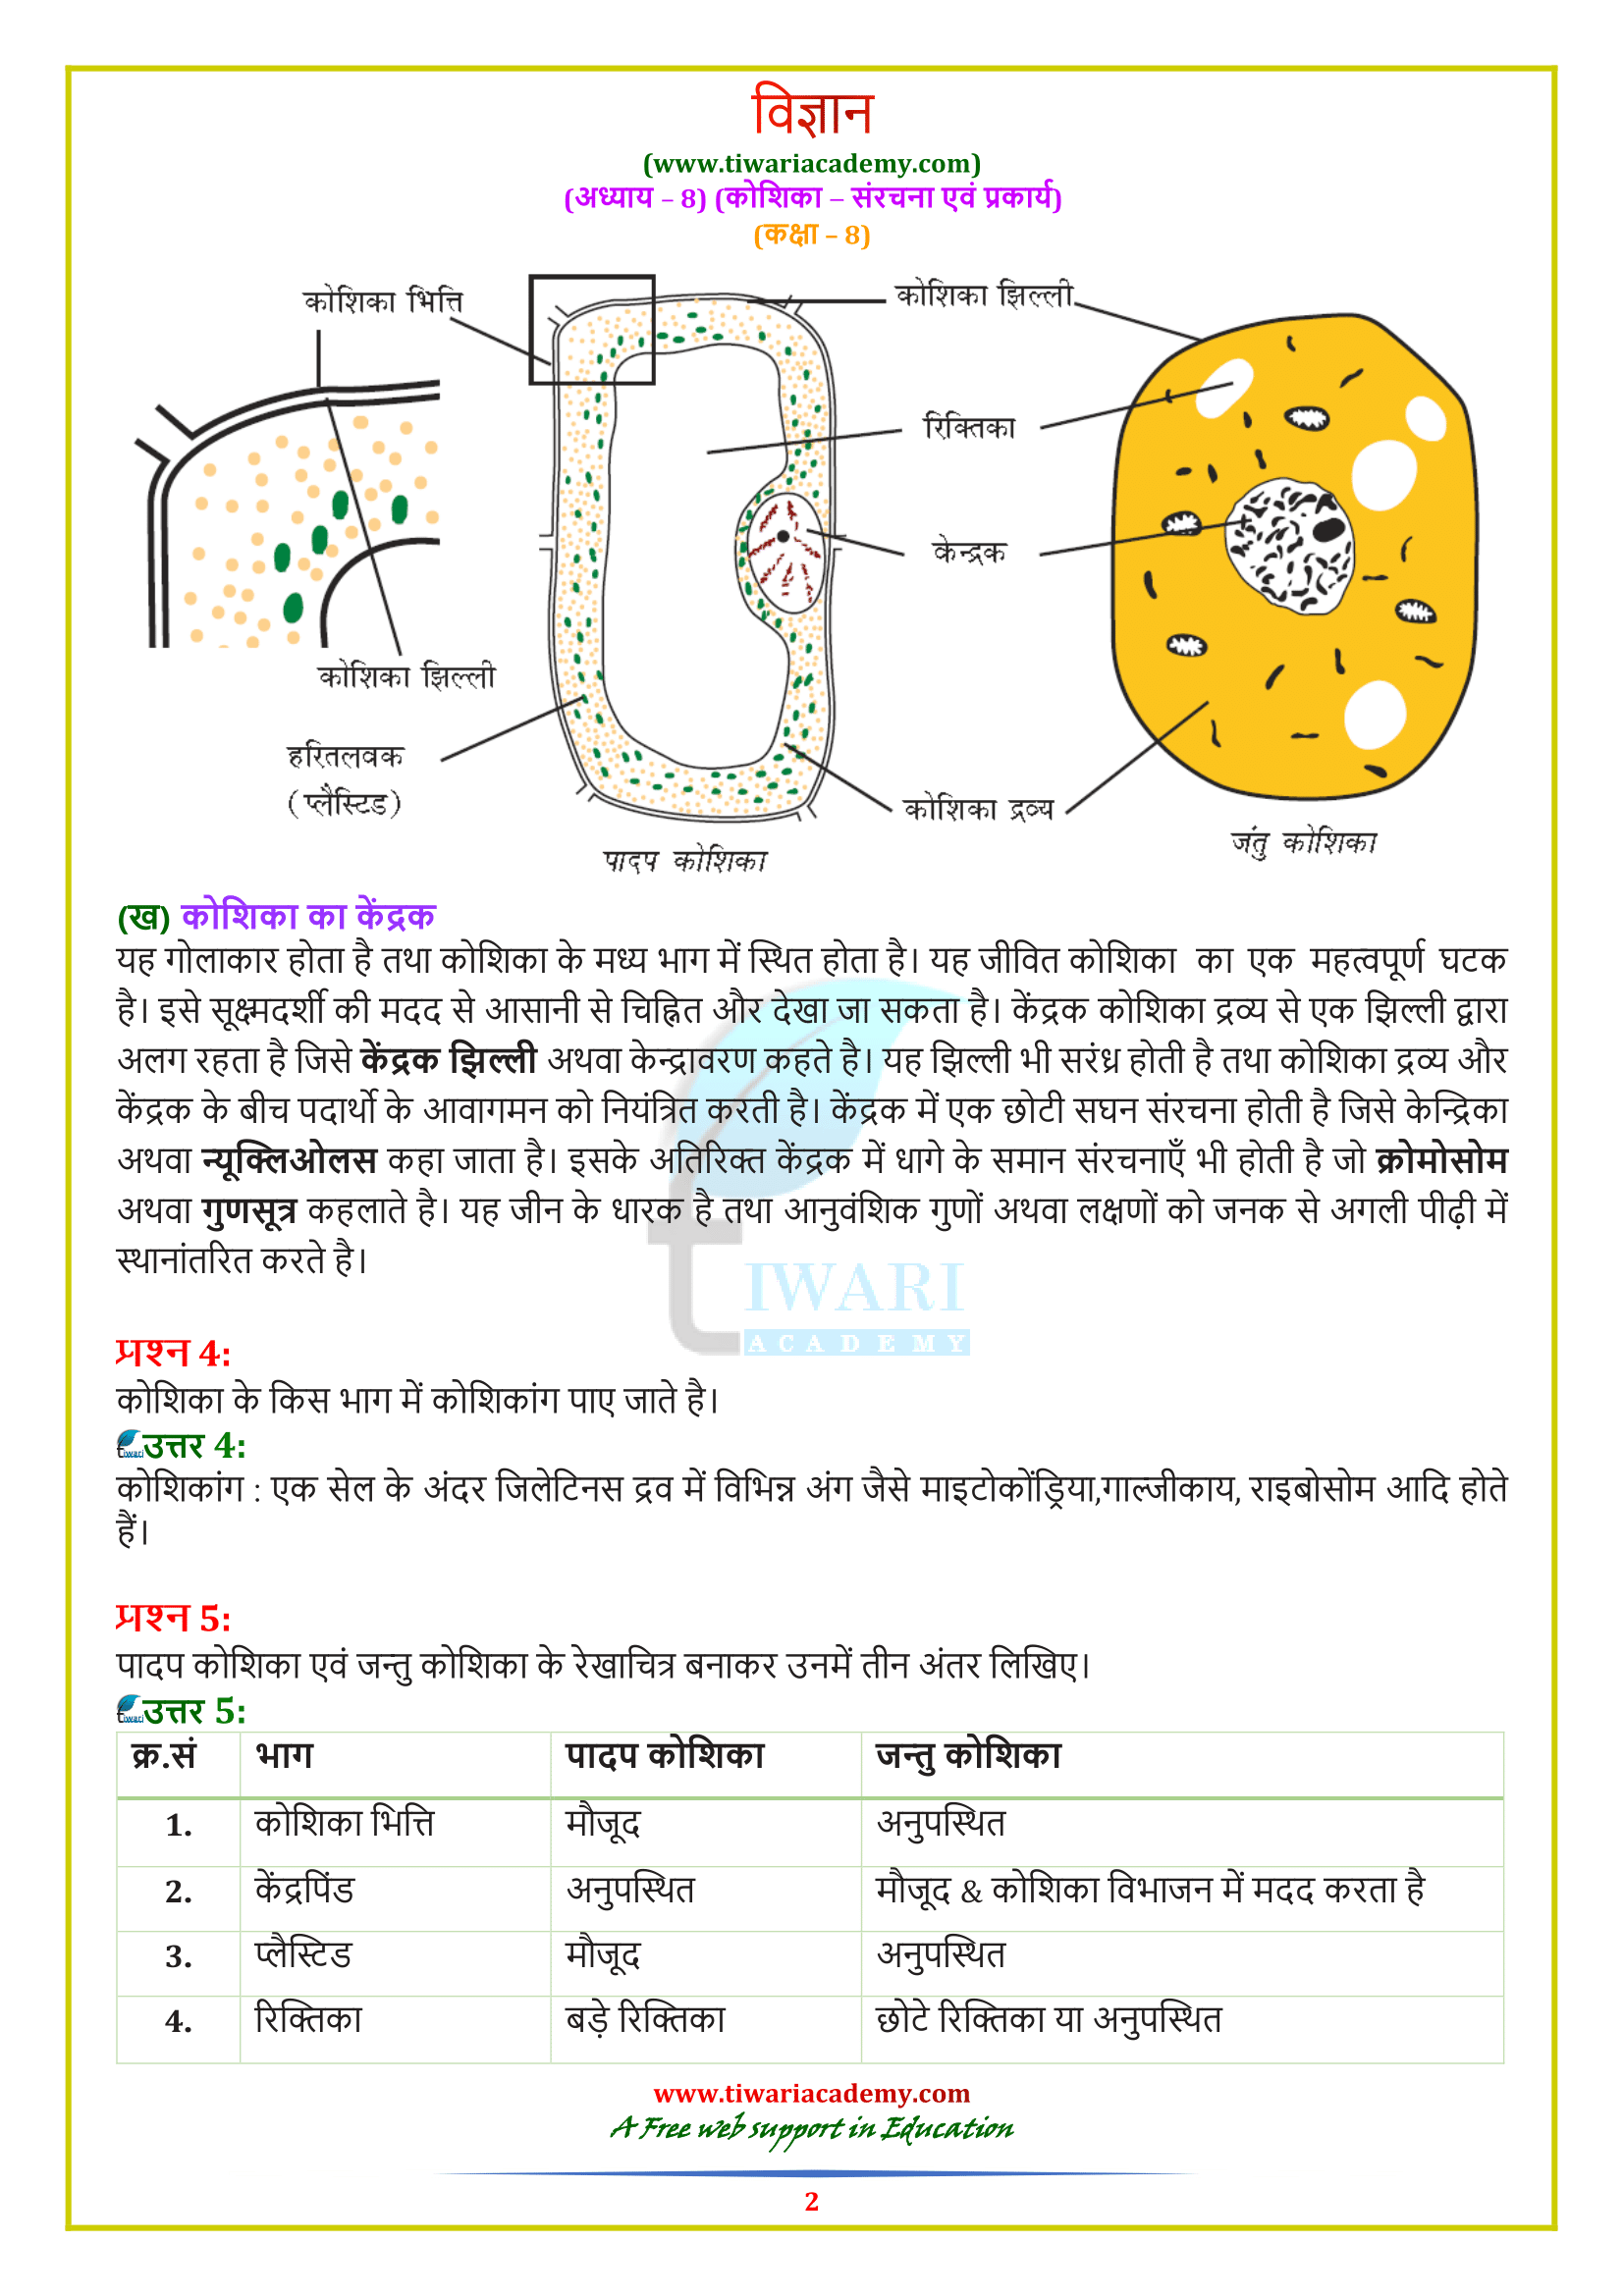 NCERT Solutions for Class 8 Science chapter 8 in Hindi Medium